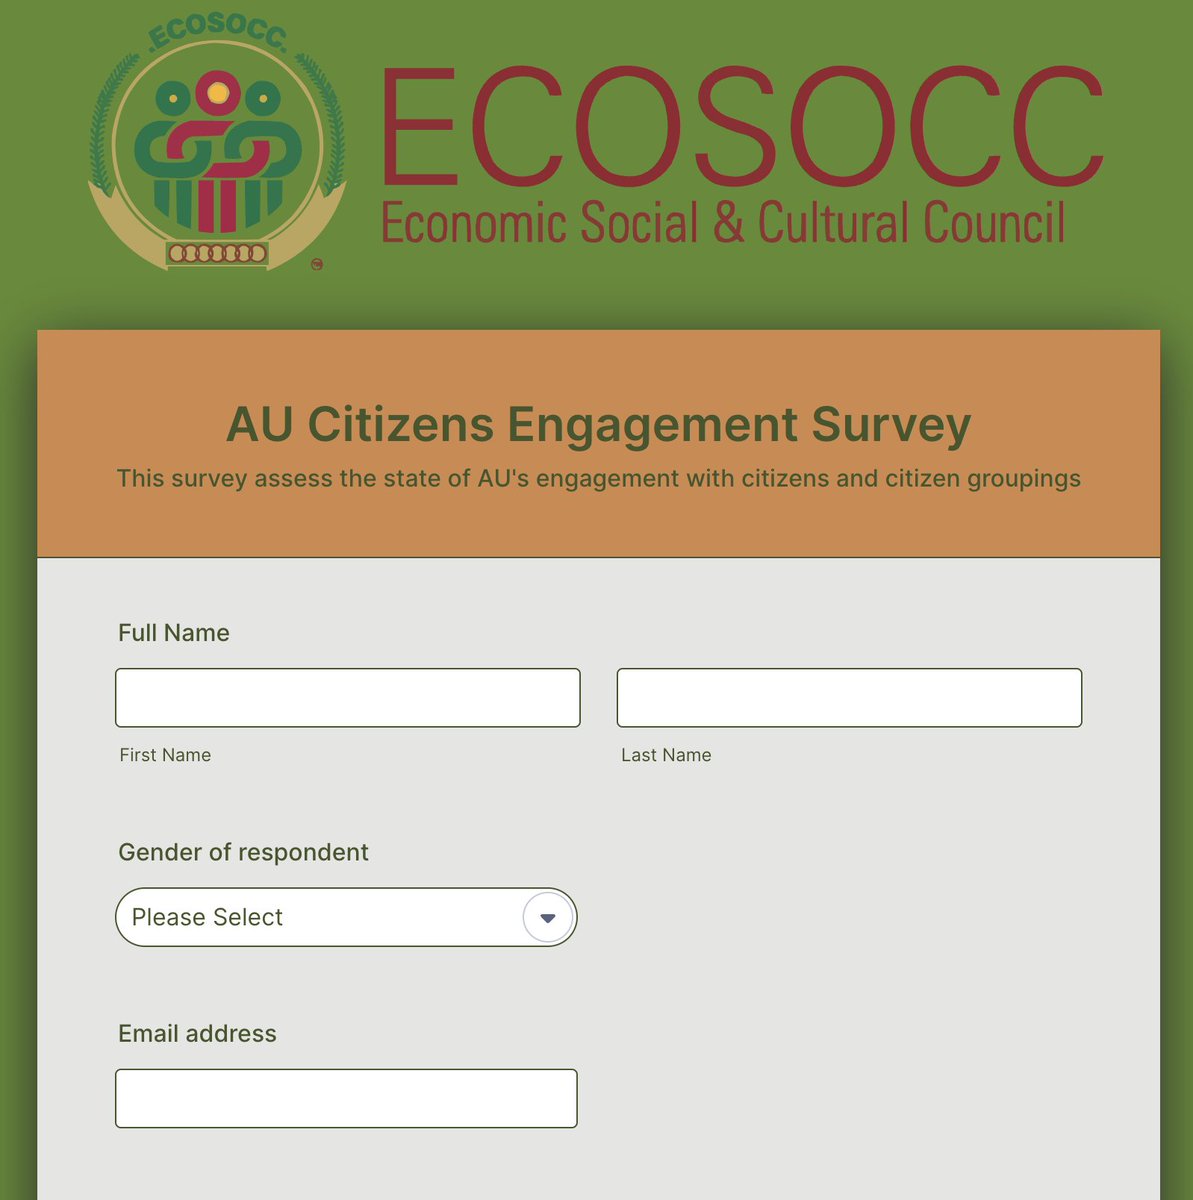 📢 Calling all African citizens and civil society organizations! @AU_ECOSOCC is working on the 'State of Citizens Engagement Report', which will explore how citizens and civil societies are interacting with the @_AfricanUnion and its Regional Economic Communities. Help us